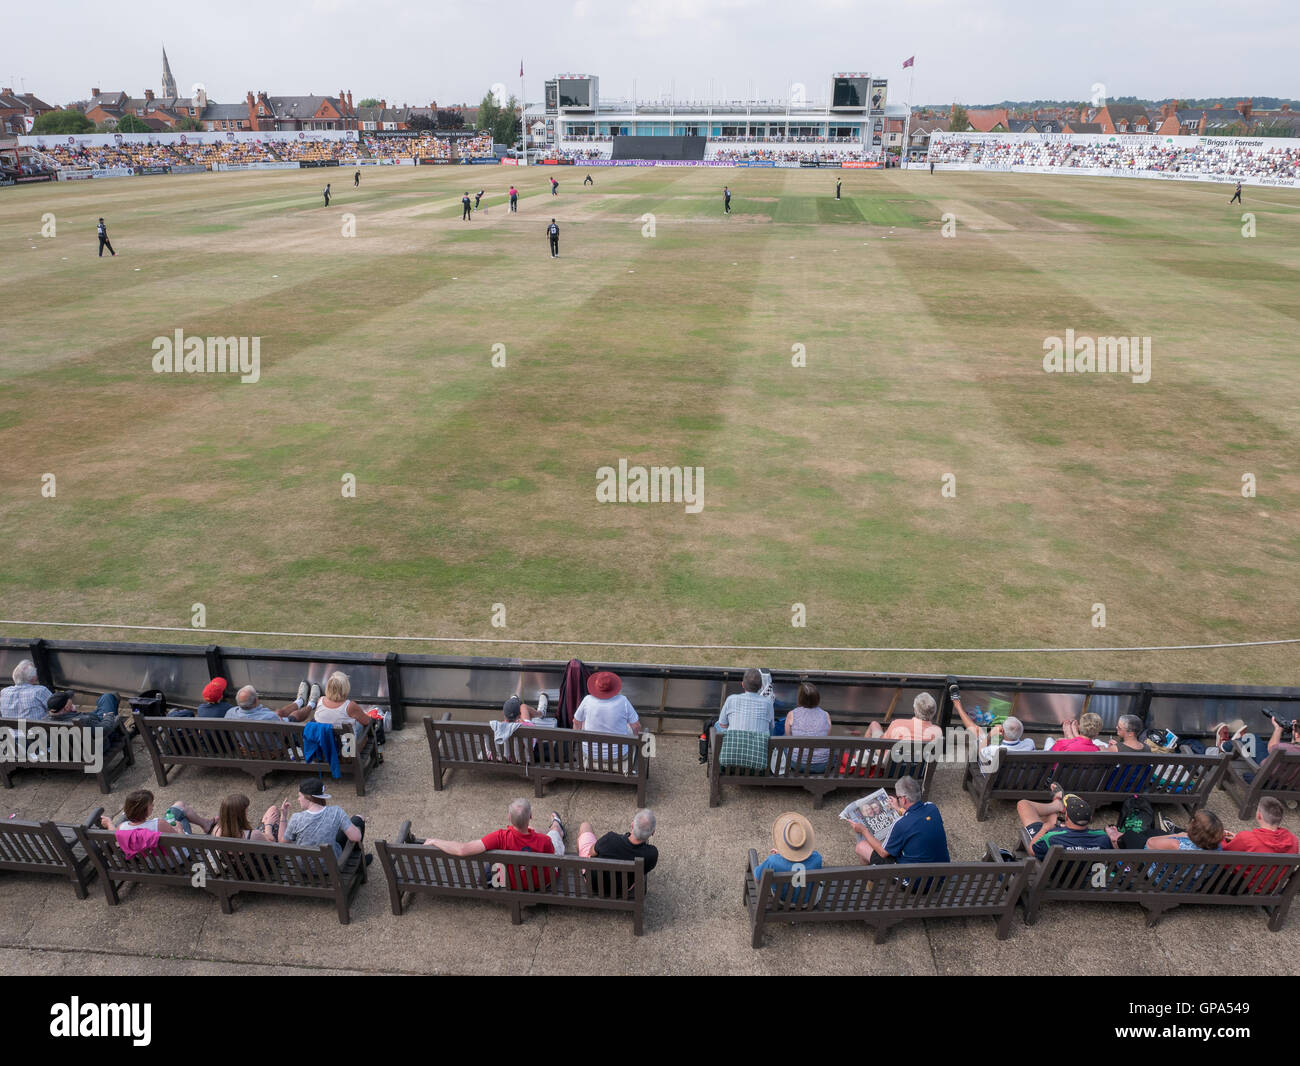 Spectators at the County ground of Northamptonshire for a one day match between N'hants and Surrey in august 2016 Stock Photo